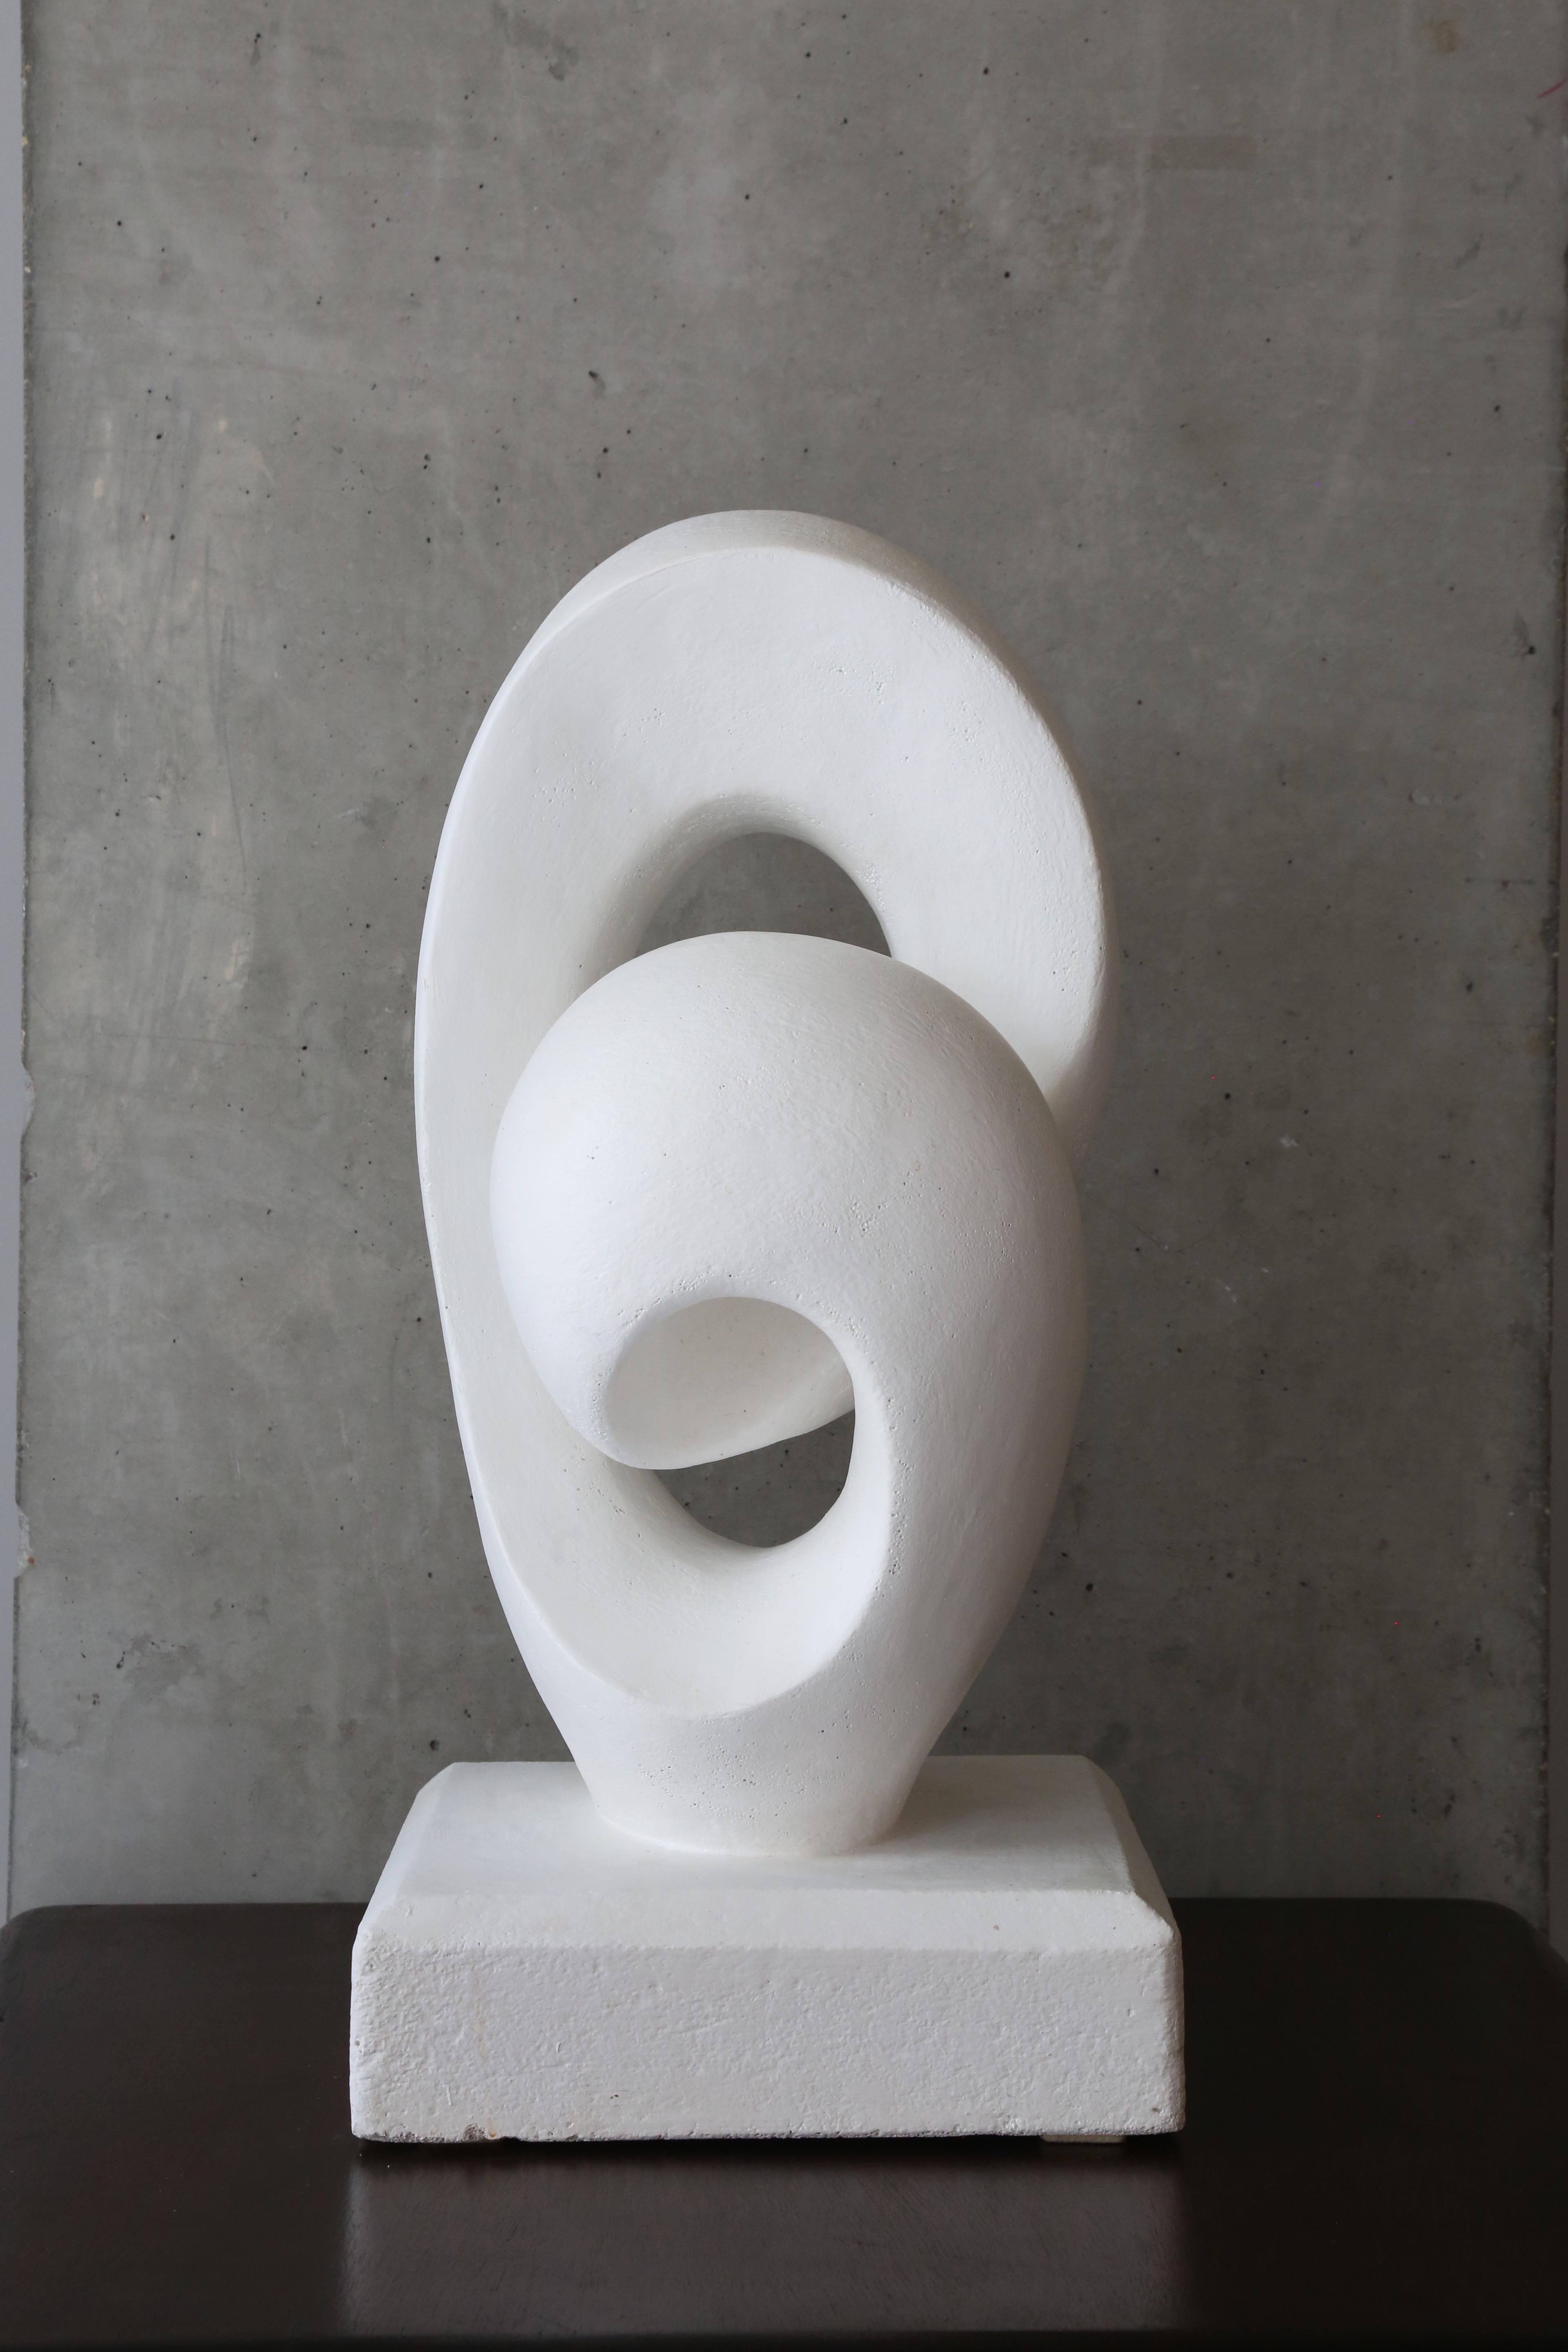 Impressive abstract modernist biomorphic plaster sculpture.

A seemingly infinite curve, with interlocking and undulating structure. 
A skilled sculptors maquette before casting in bronze or carving into marble.

Bought in Provincial South Western